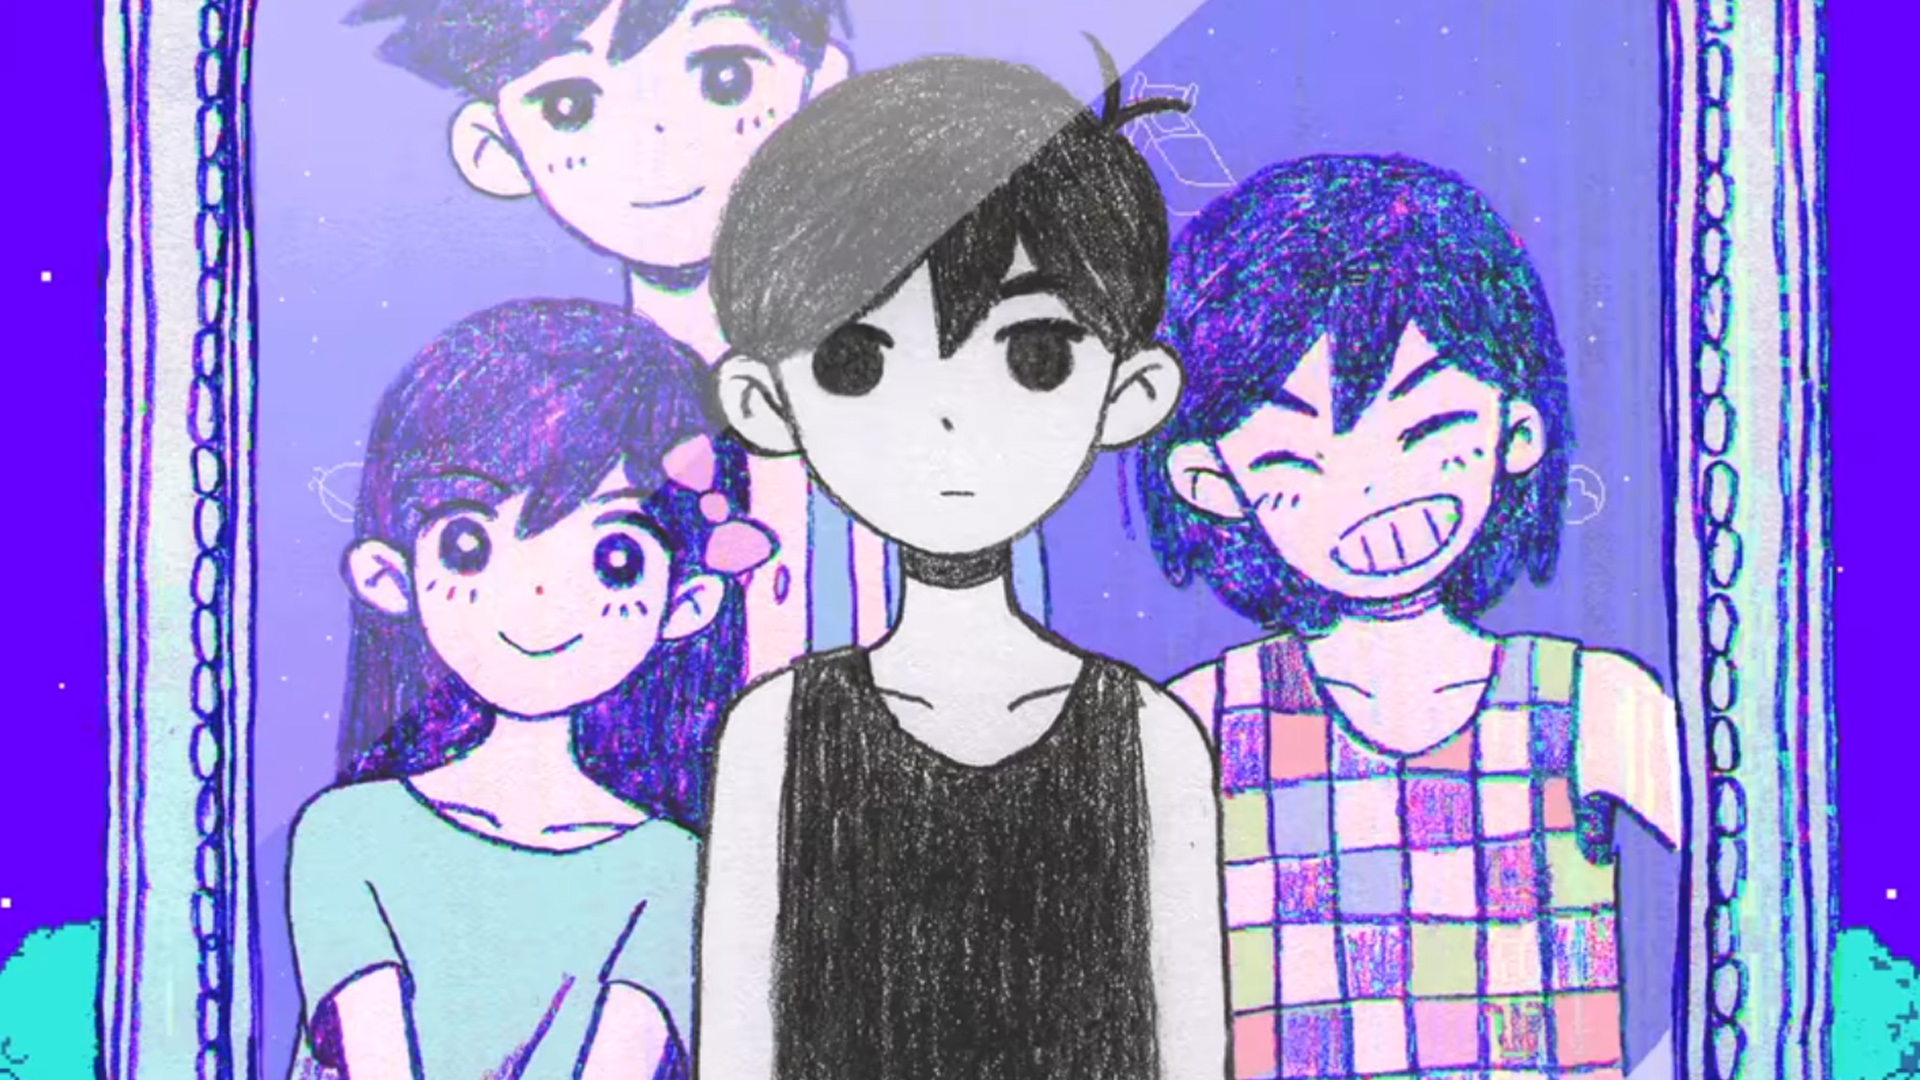 Kickstarted RPG OMORI gets a new trailer and my full attention | Nintendo Wire1920 x 1080